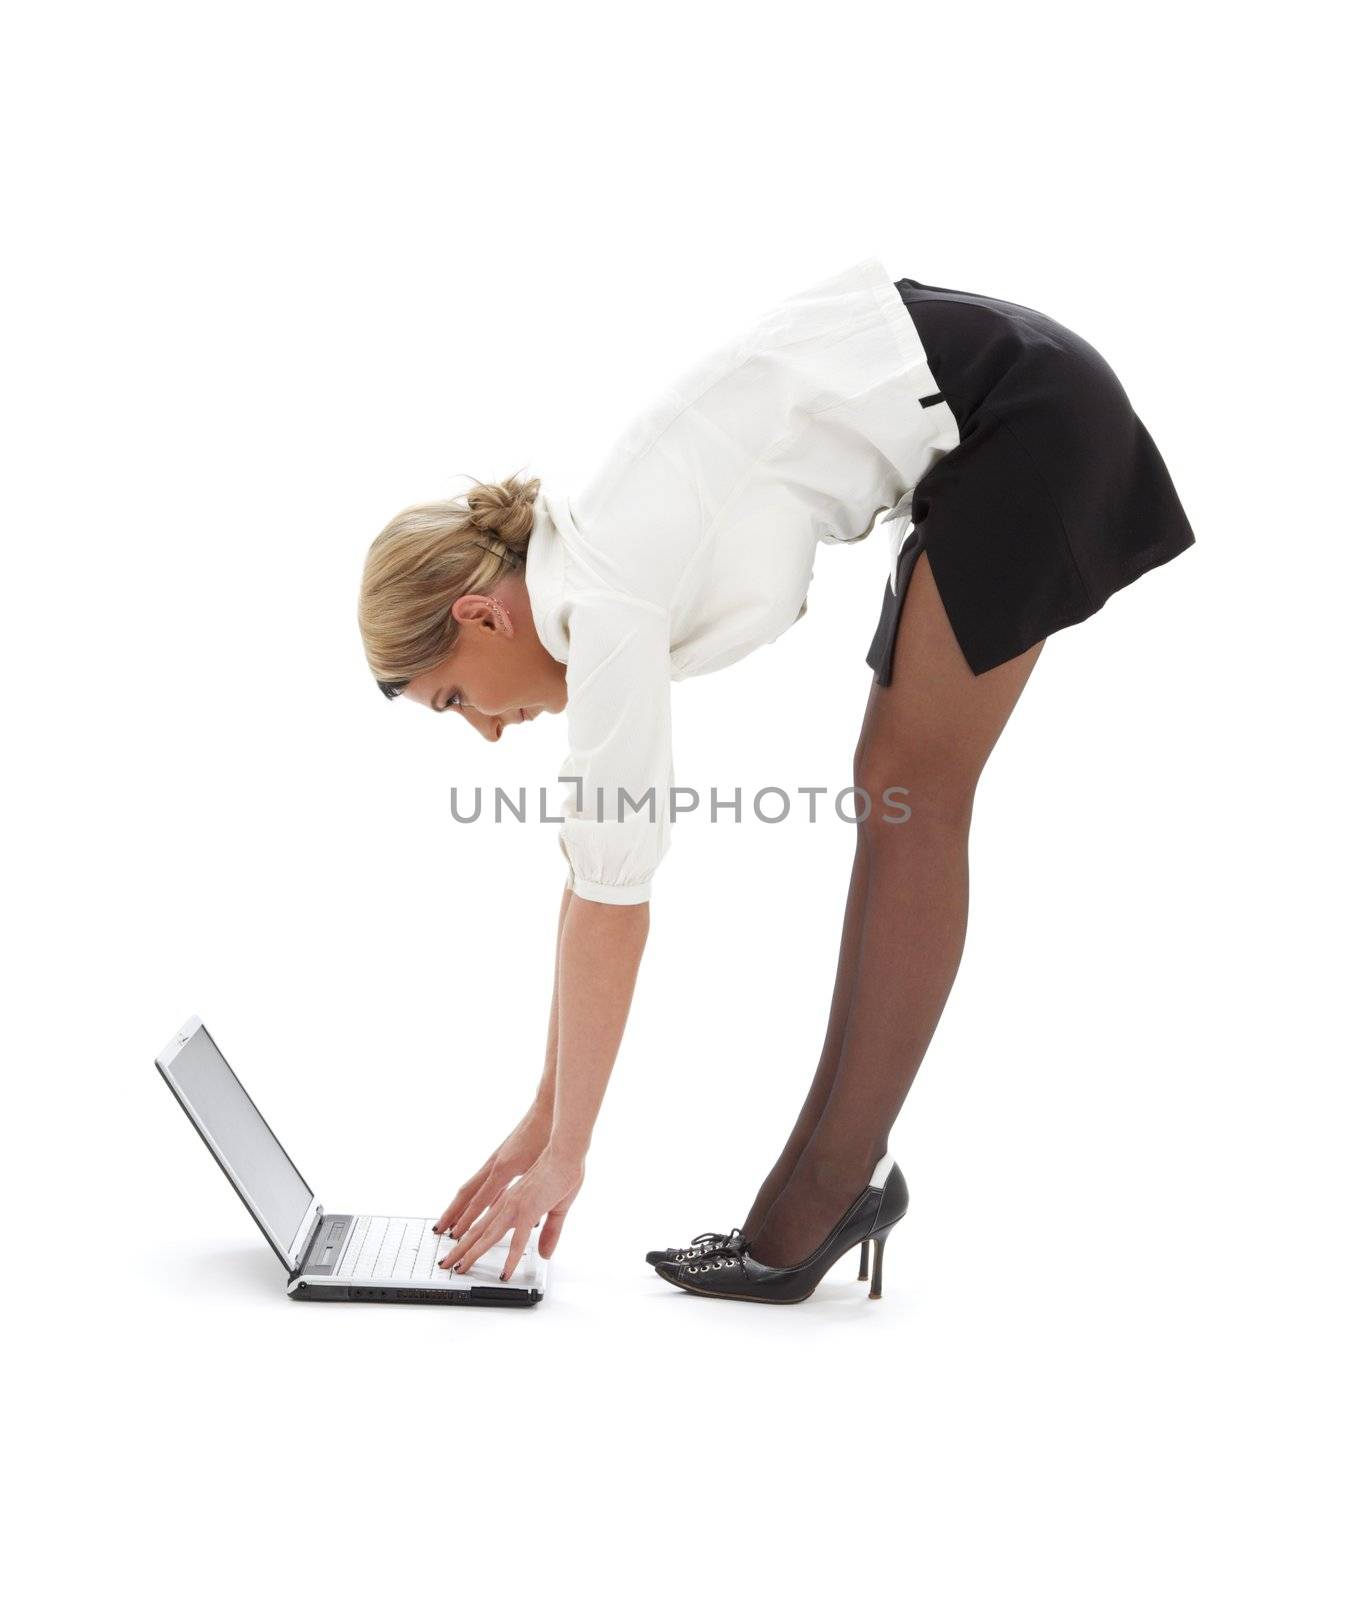 flexible businesswoman with laptop computer over white